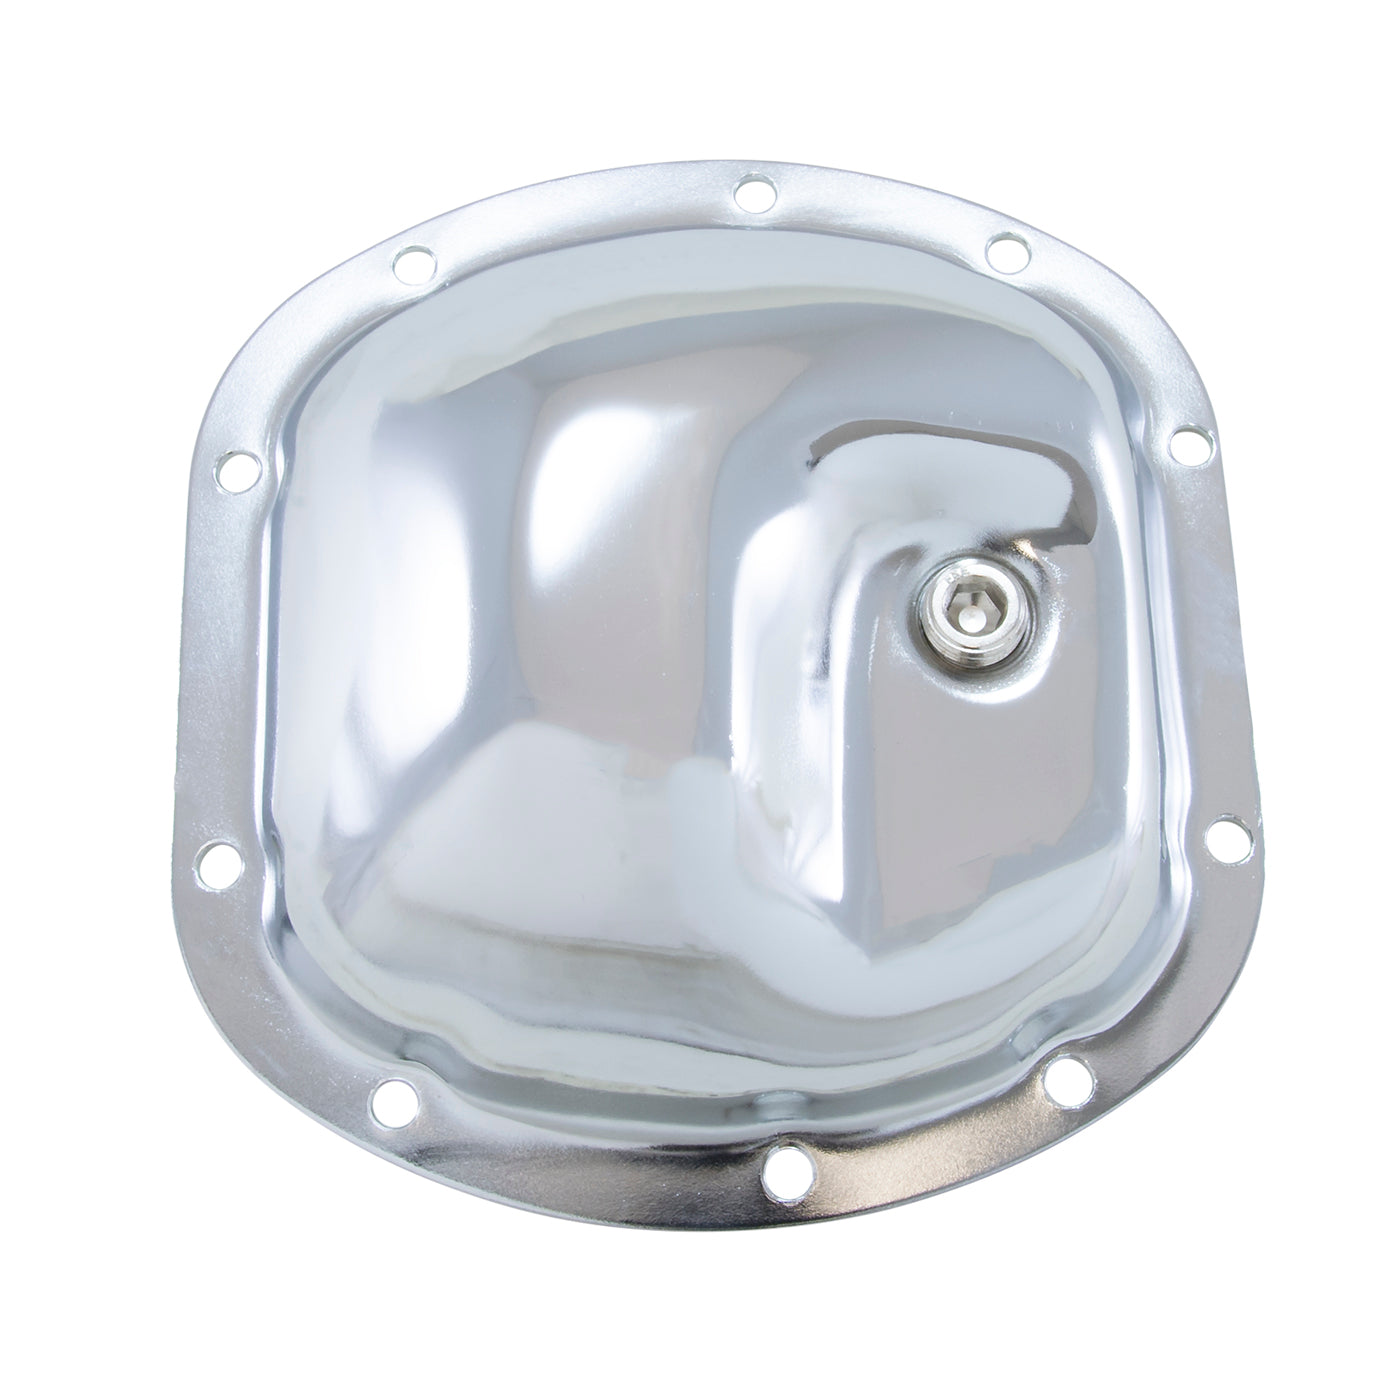 Yukon Gear Jeep (4WD) Differential Cover - Front YPC1-D30-REV